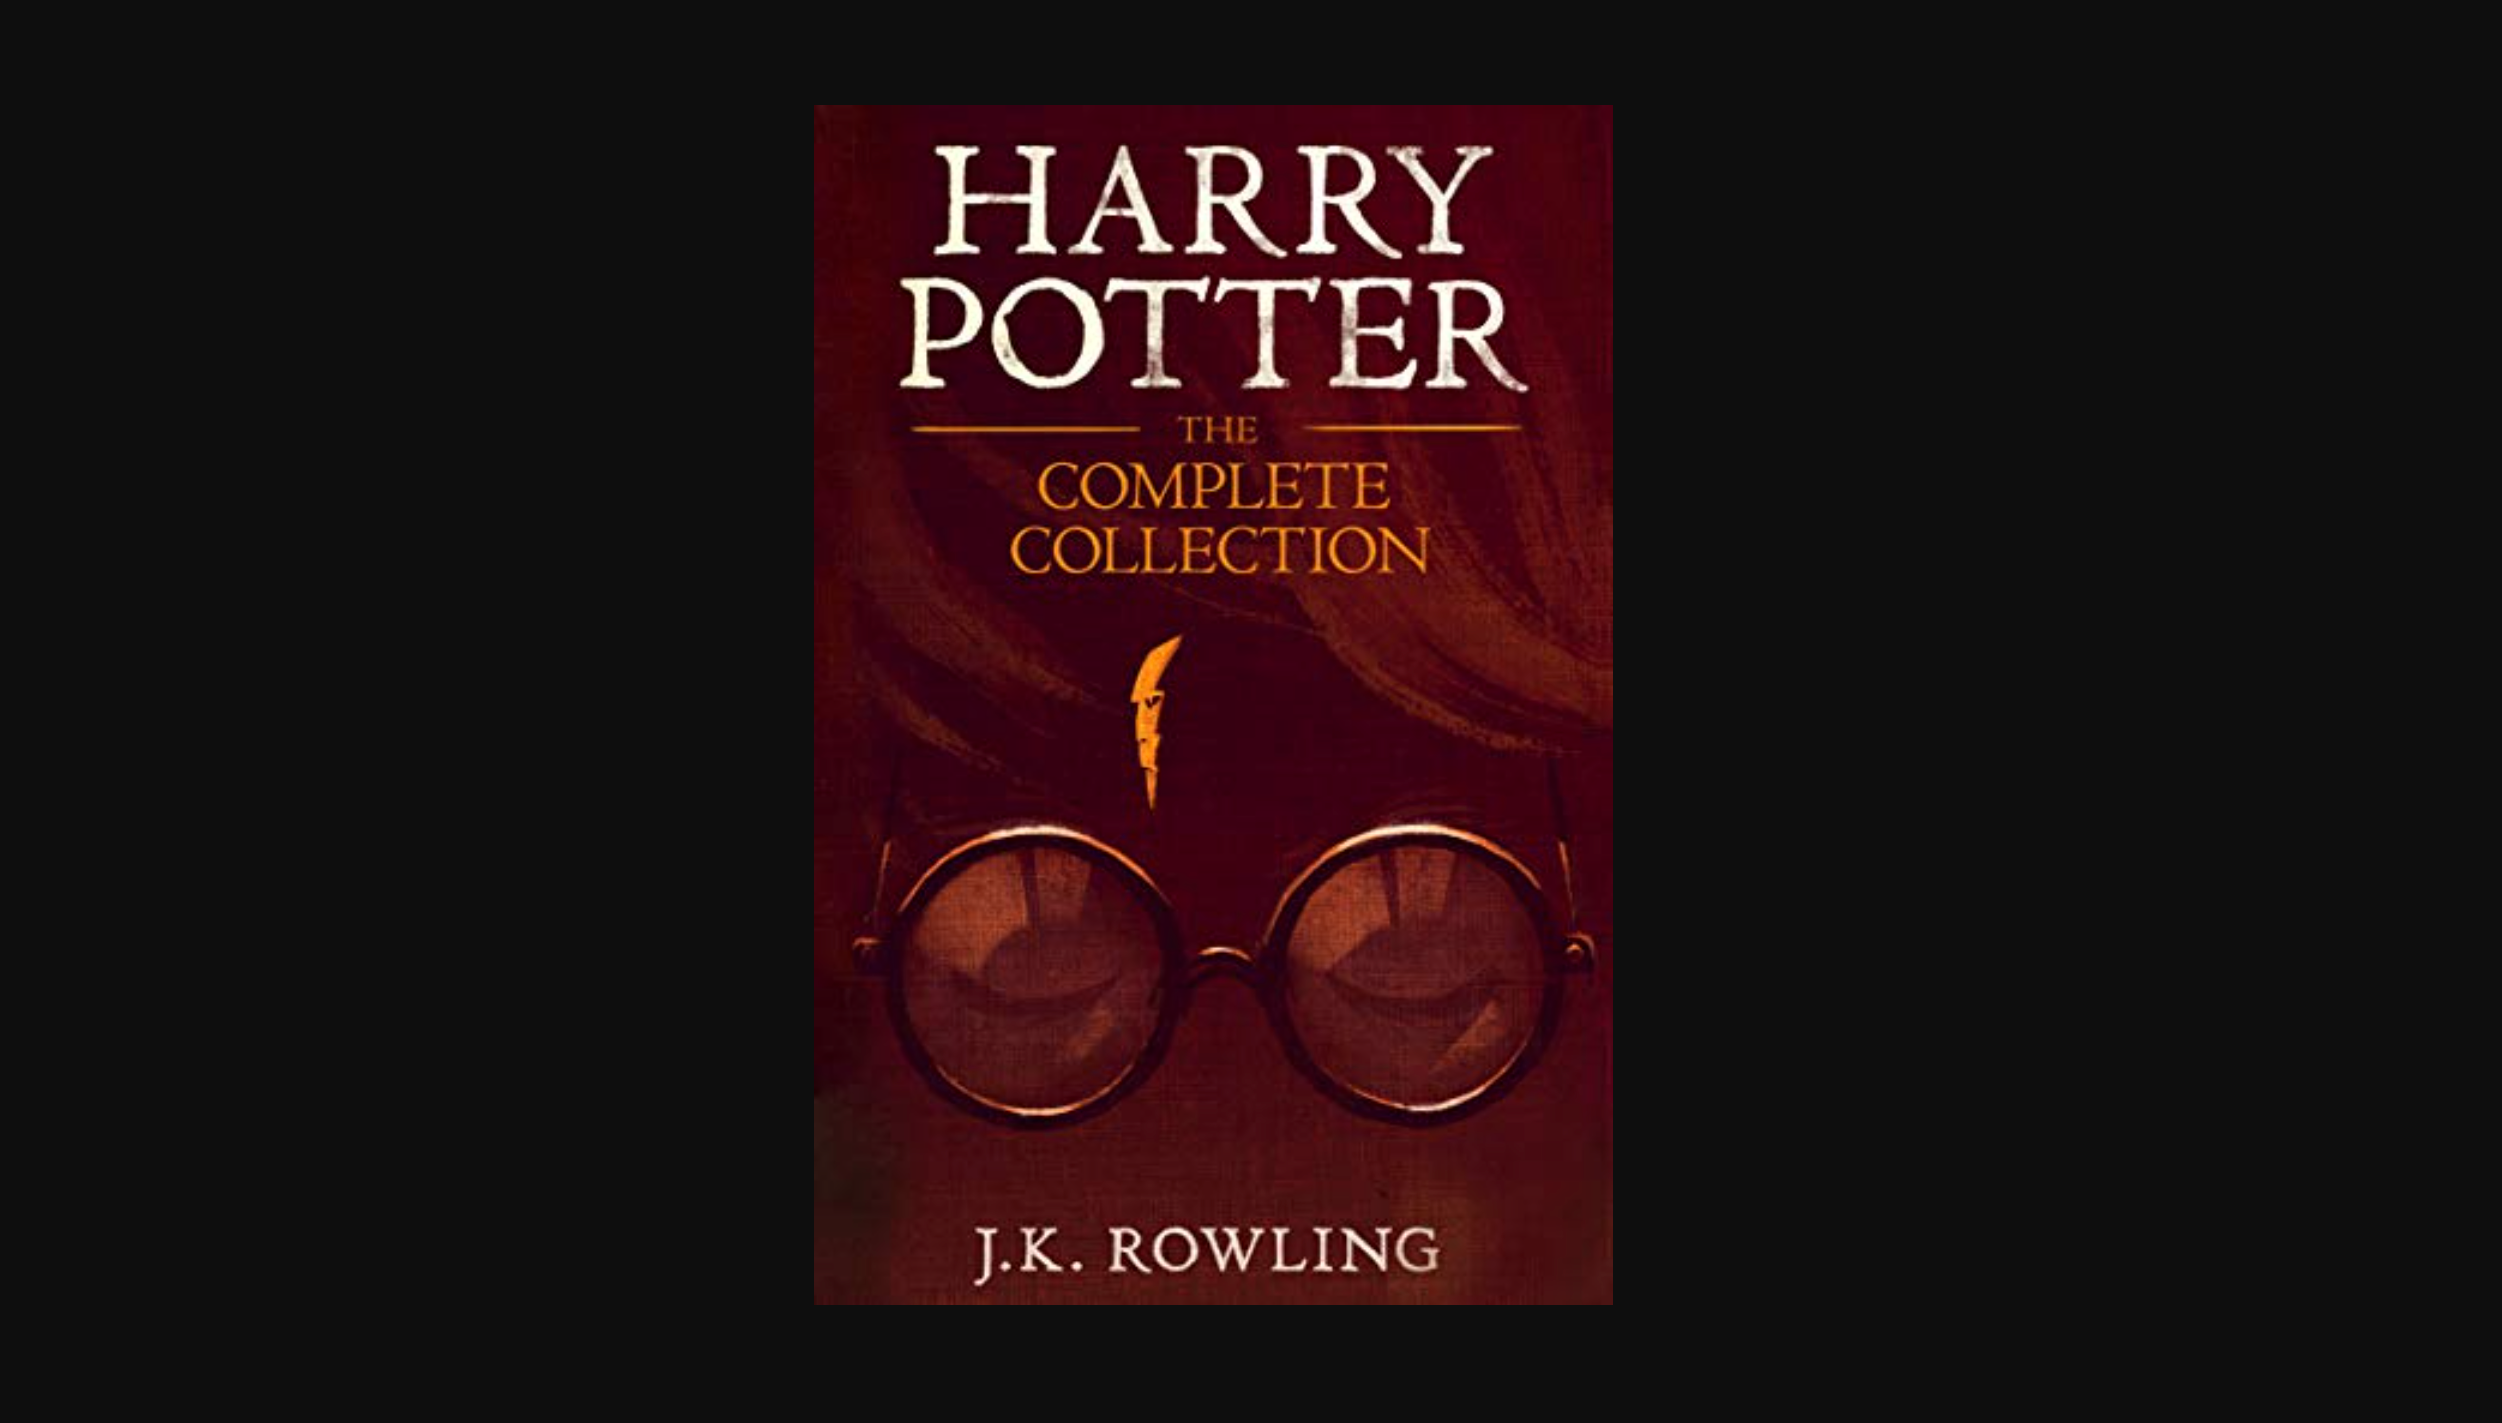 Can I read the Harry Potter books on a Kindle? 2